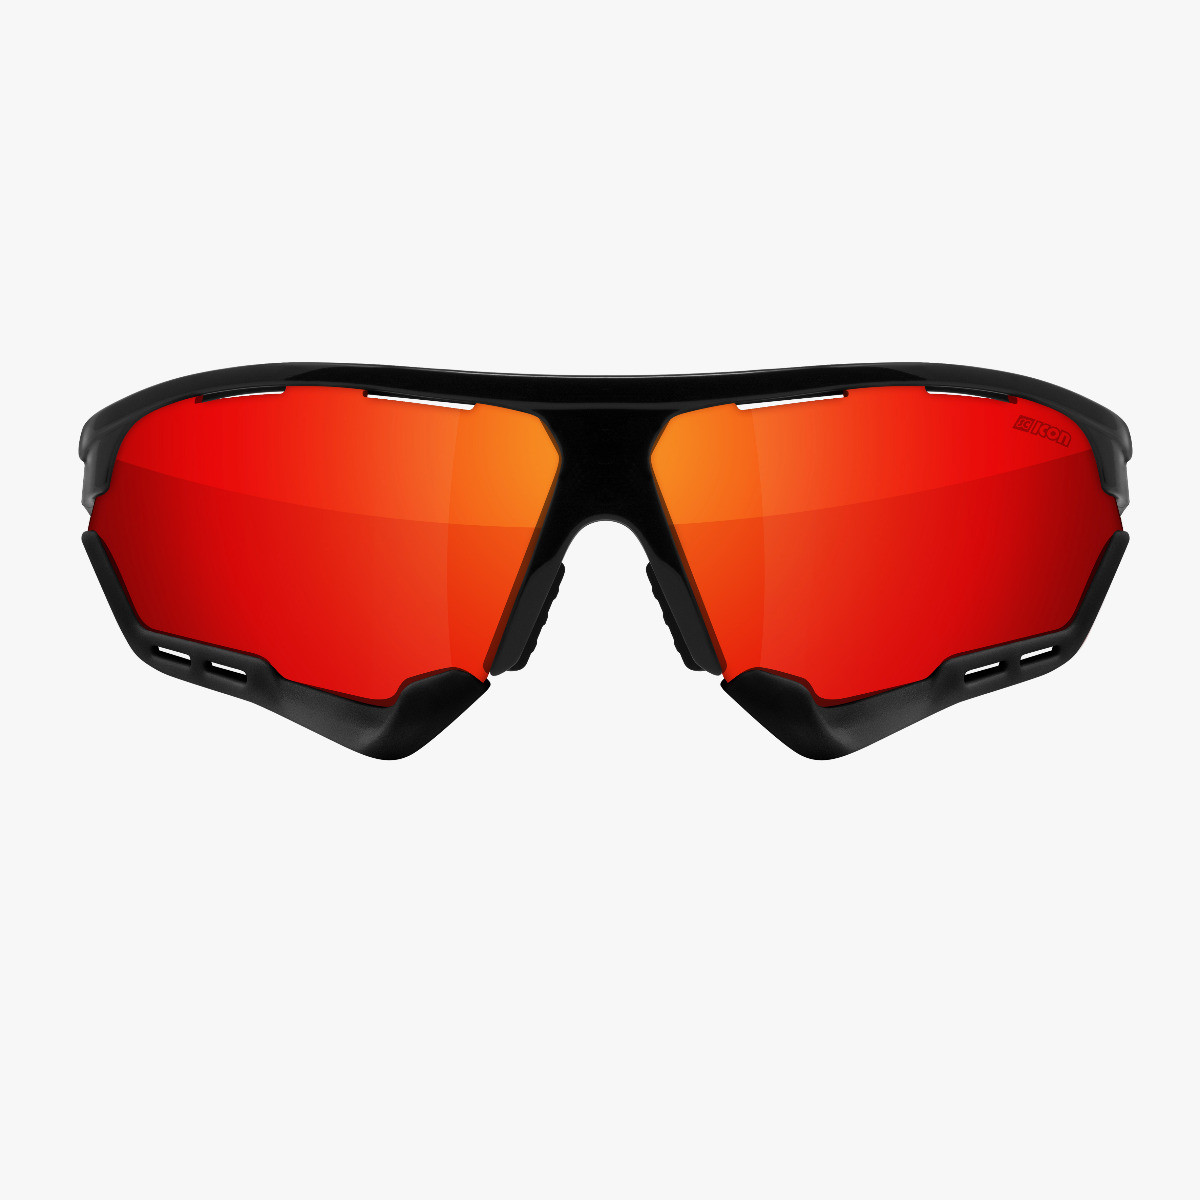 Scicon Sports | Aerocomfort Sport Cycling Performance Sunglasses - Black / Red - EY15060203
